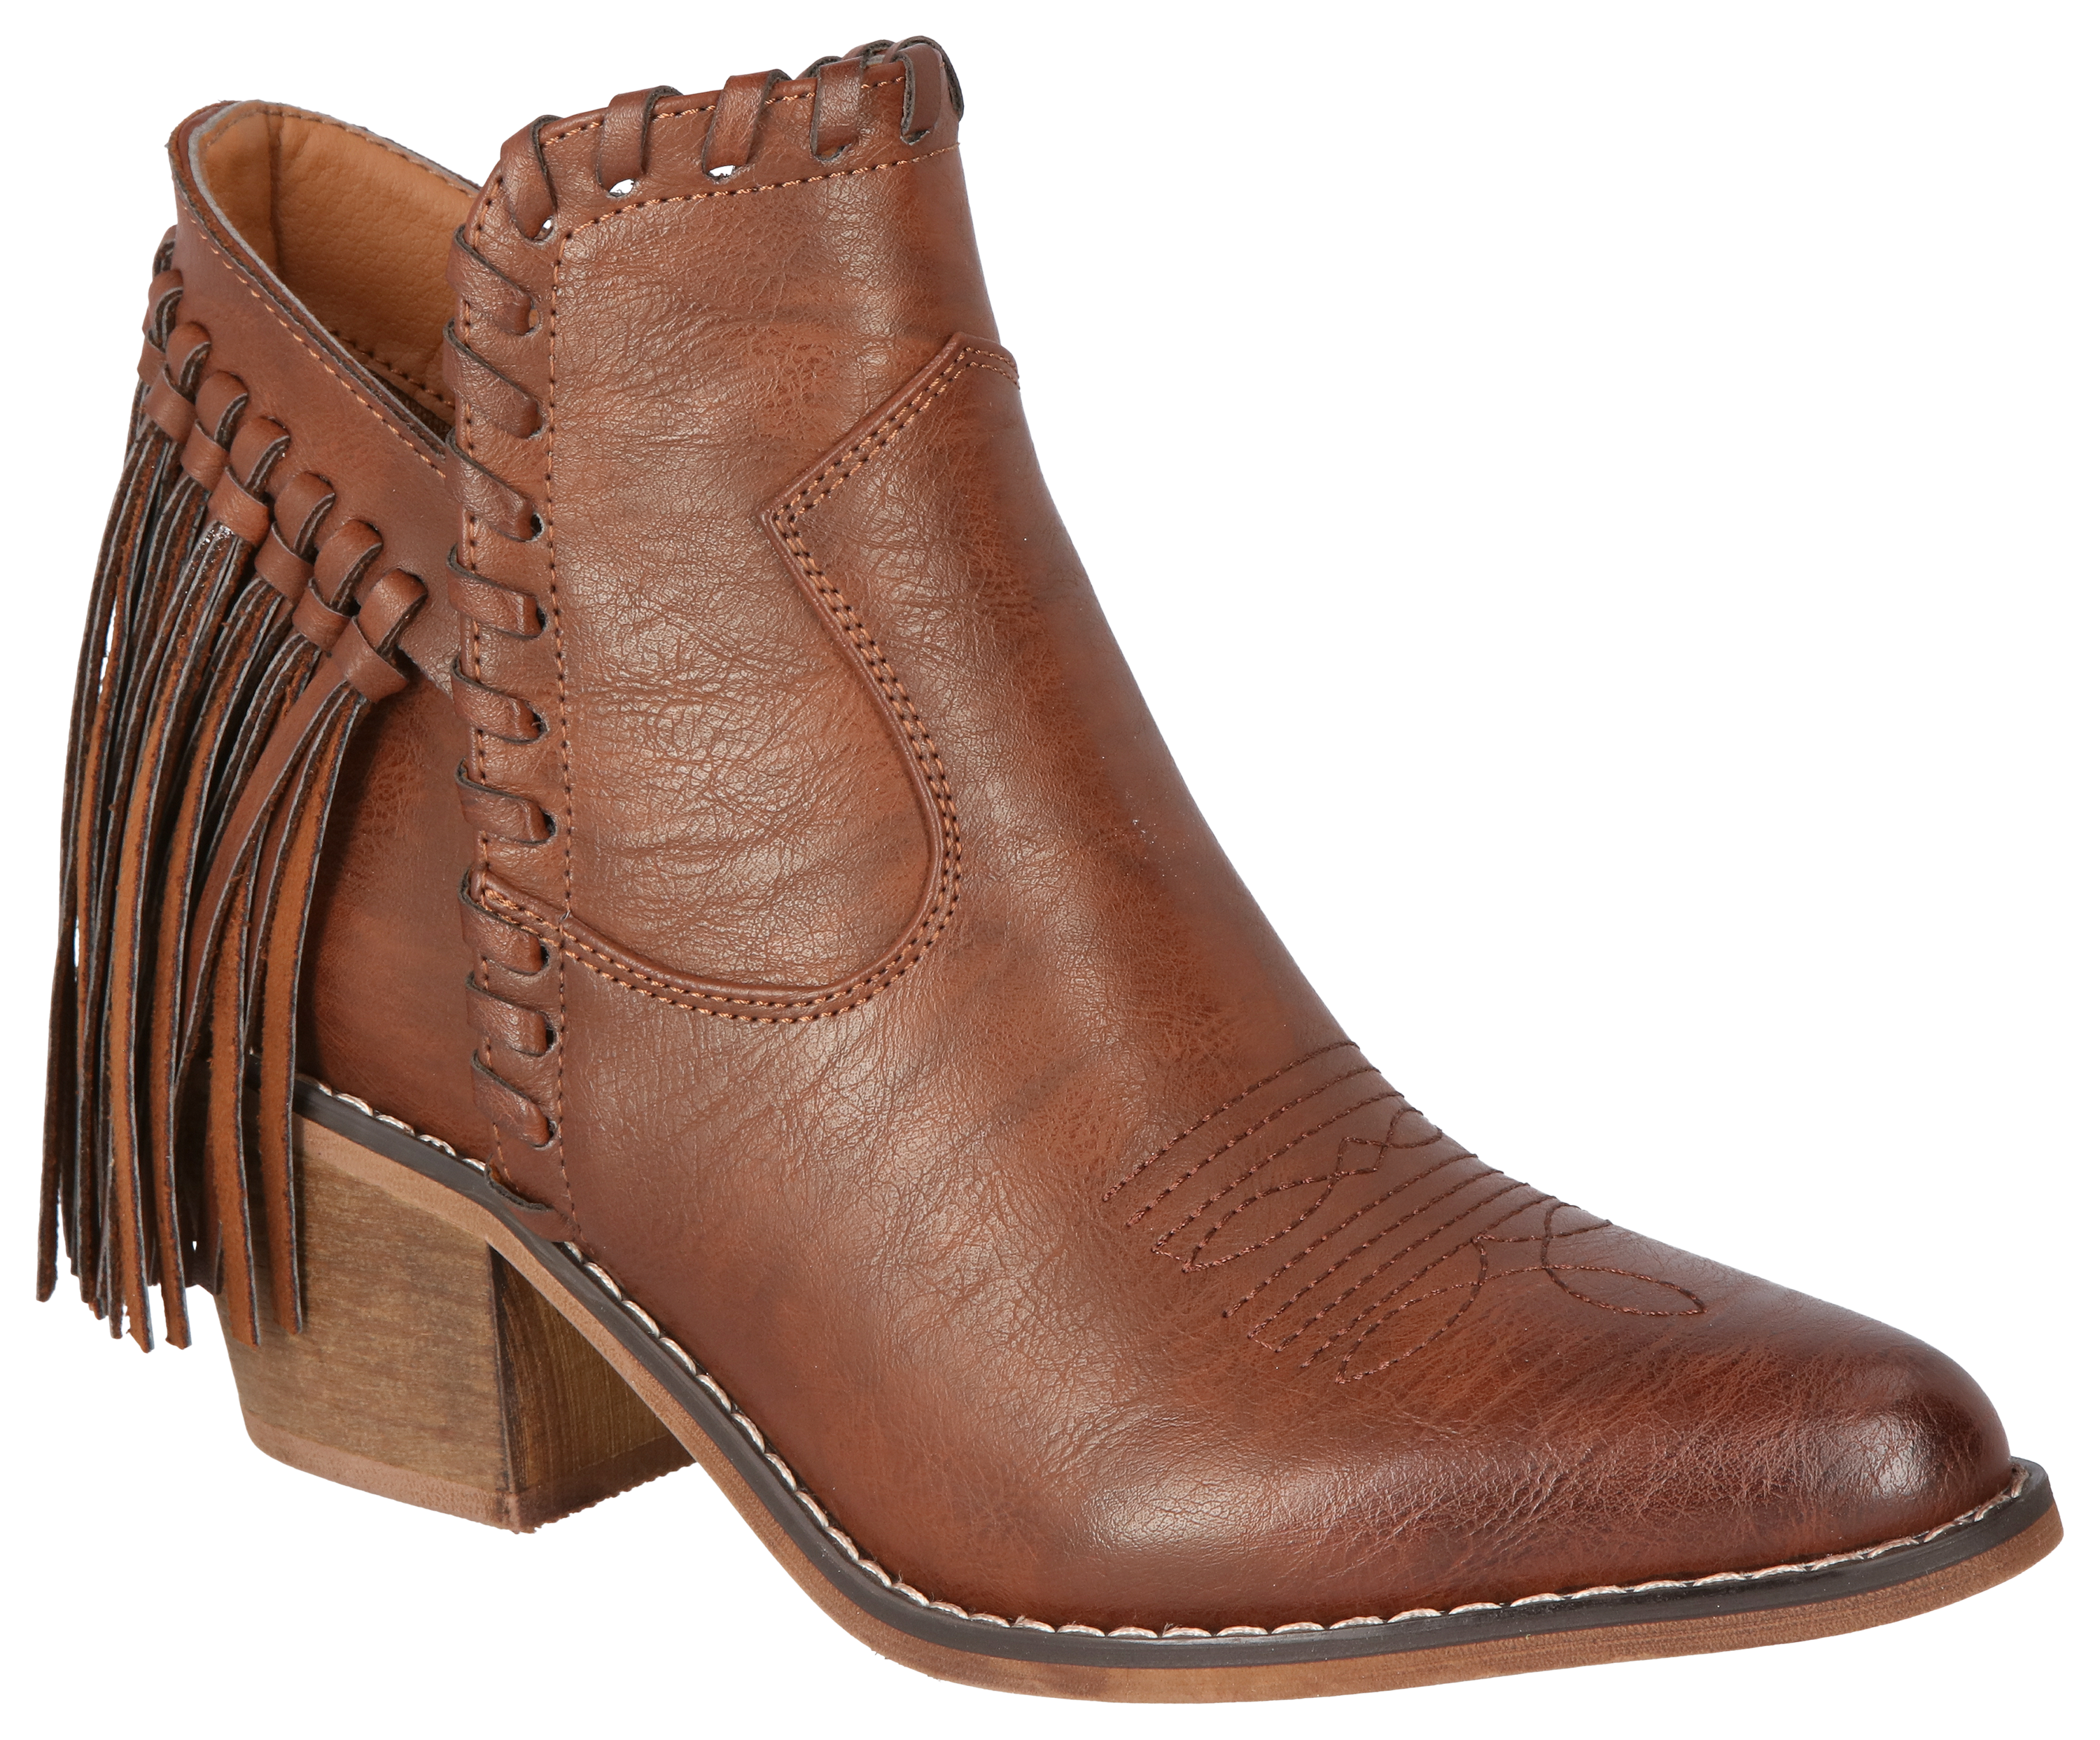 Natural Reflections Keykee Tassel Boots for Ladies - Whiskey - 8M